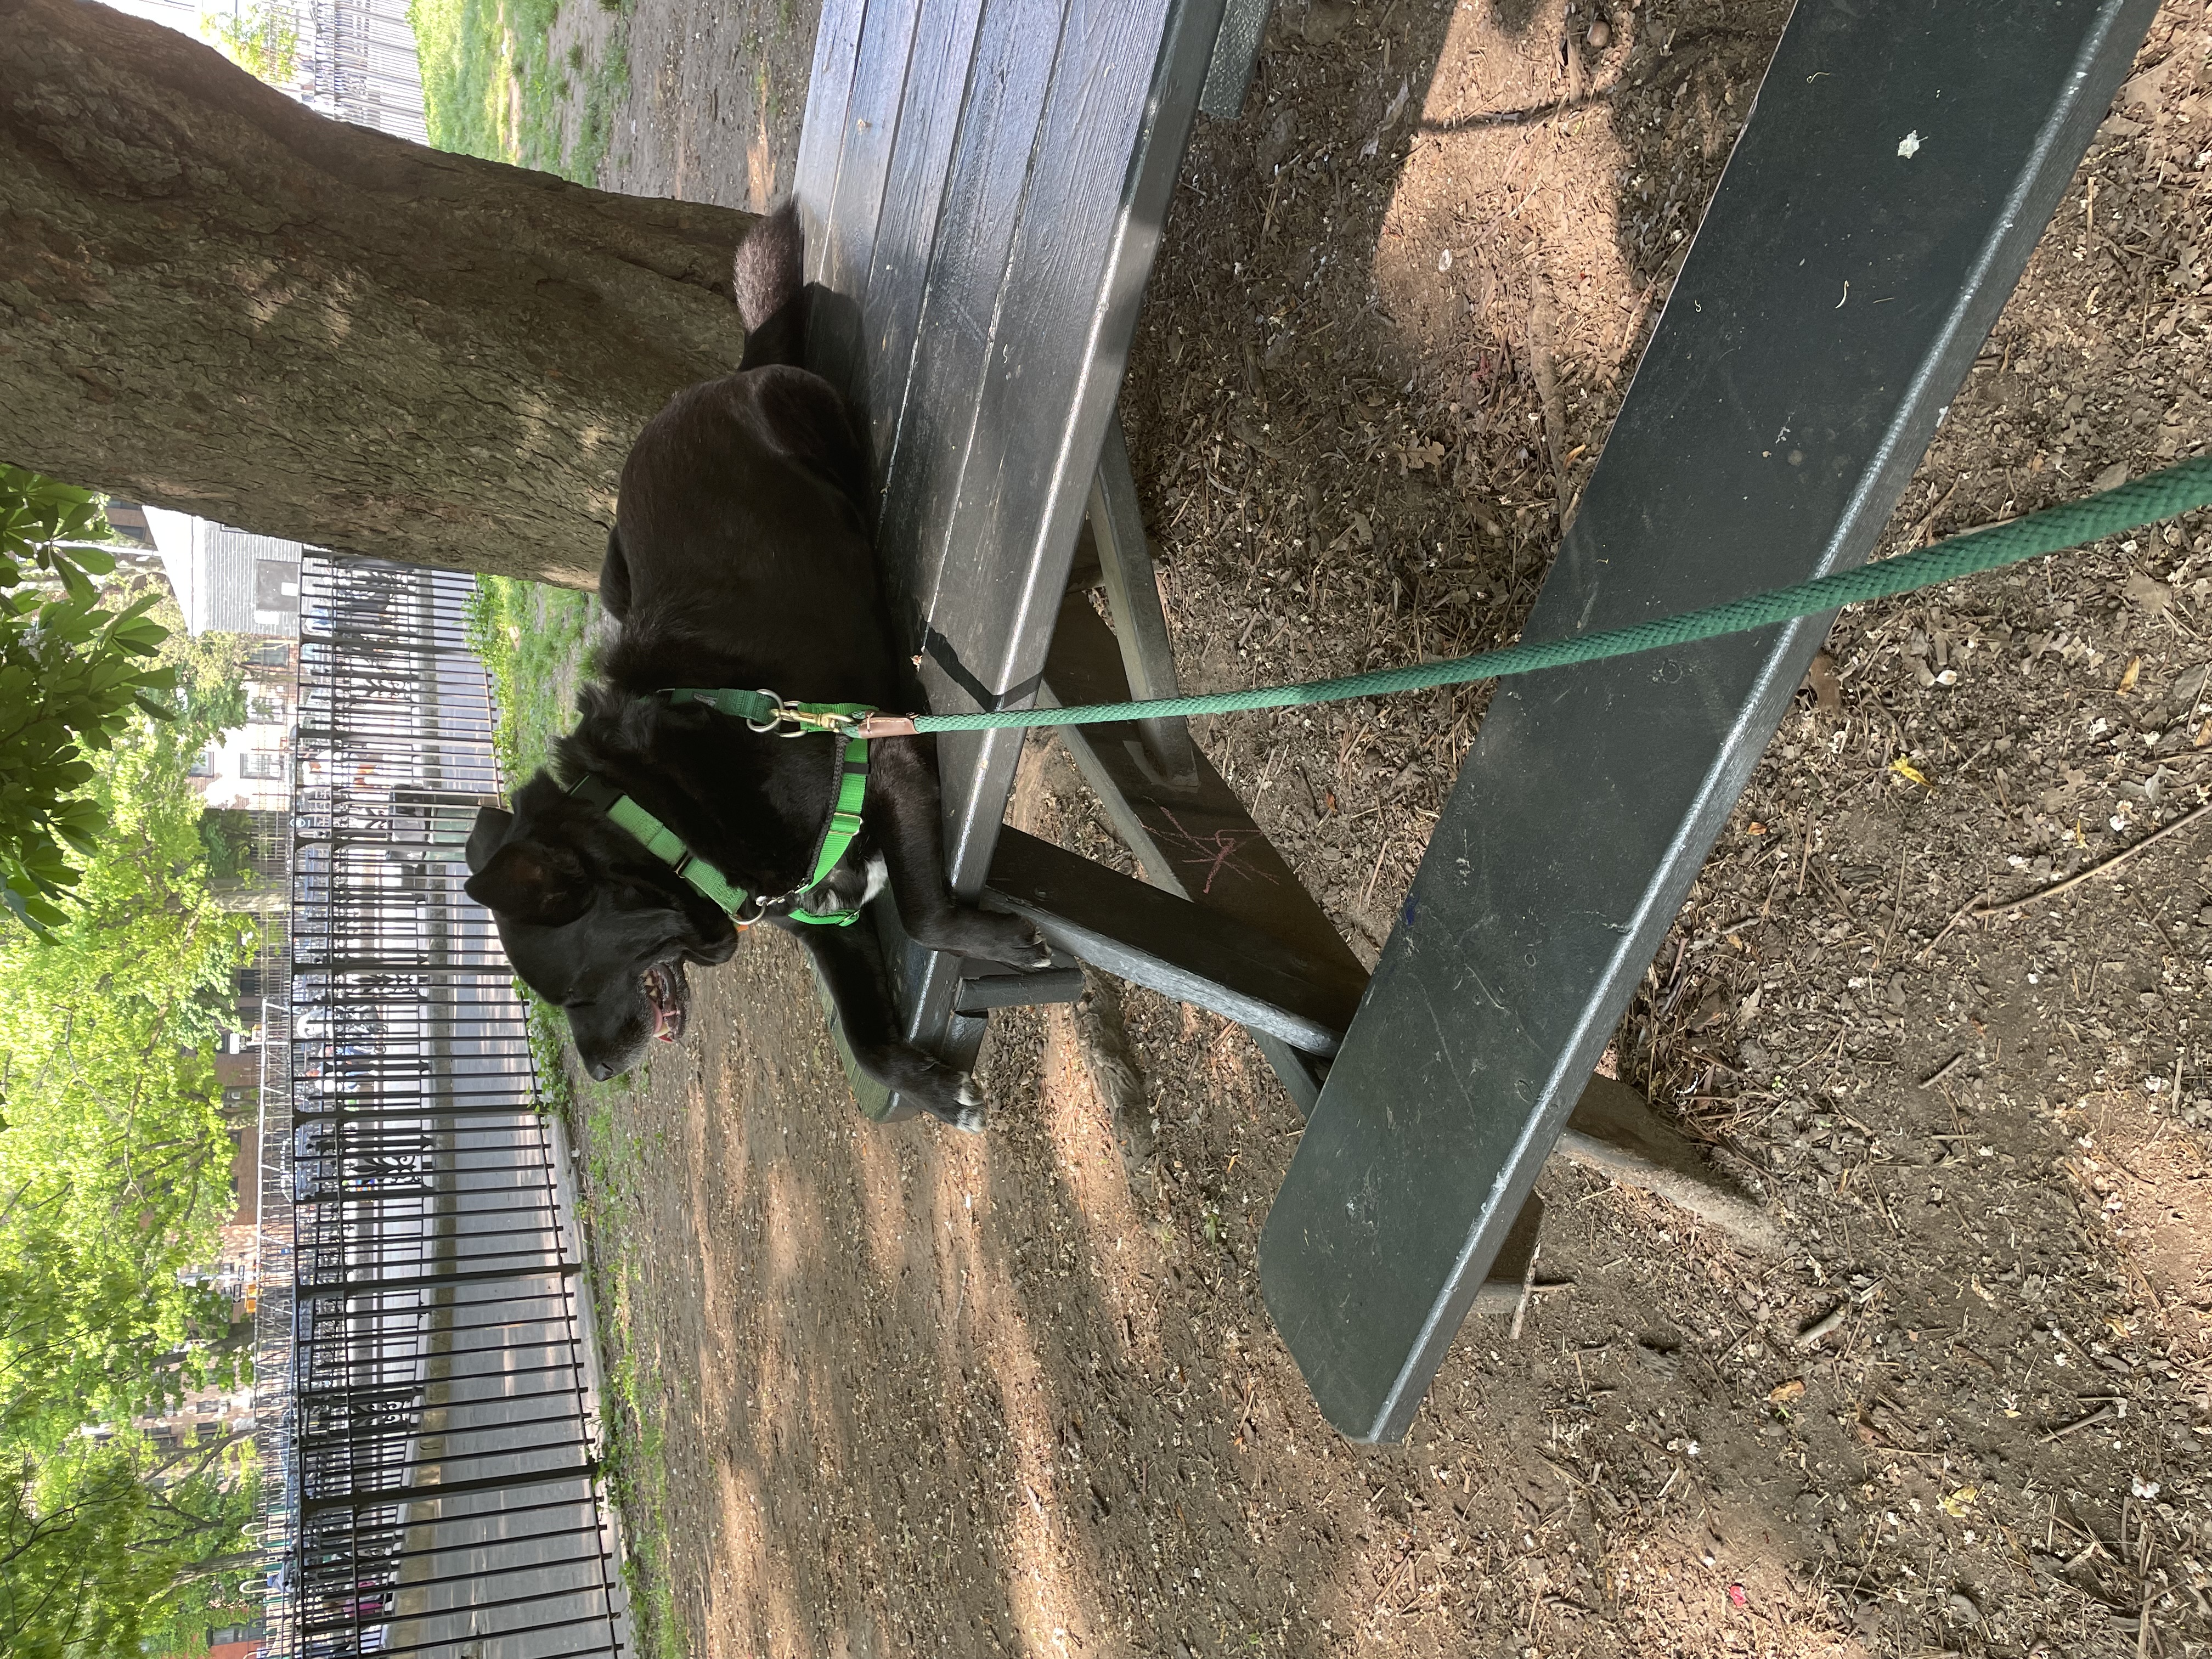 A black dog in a green harness & leash lies on a green picnic table in a city park